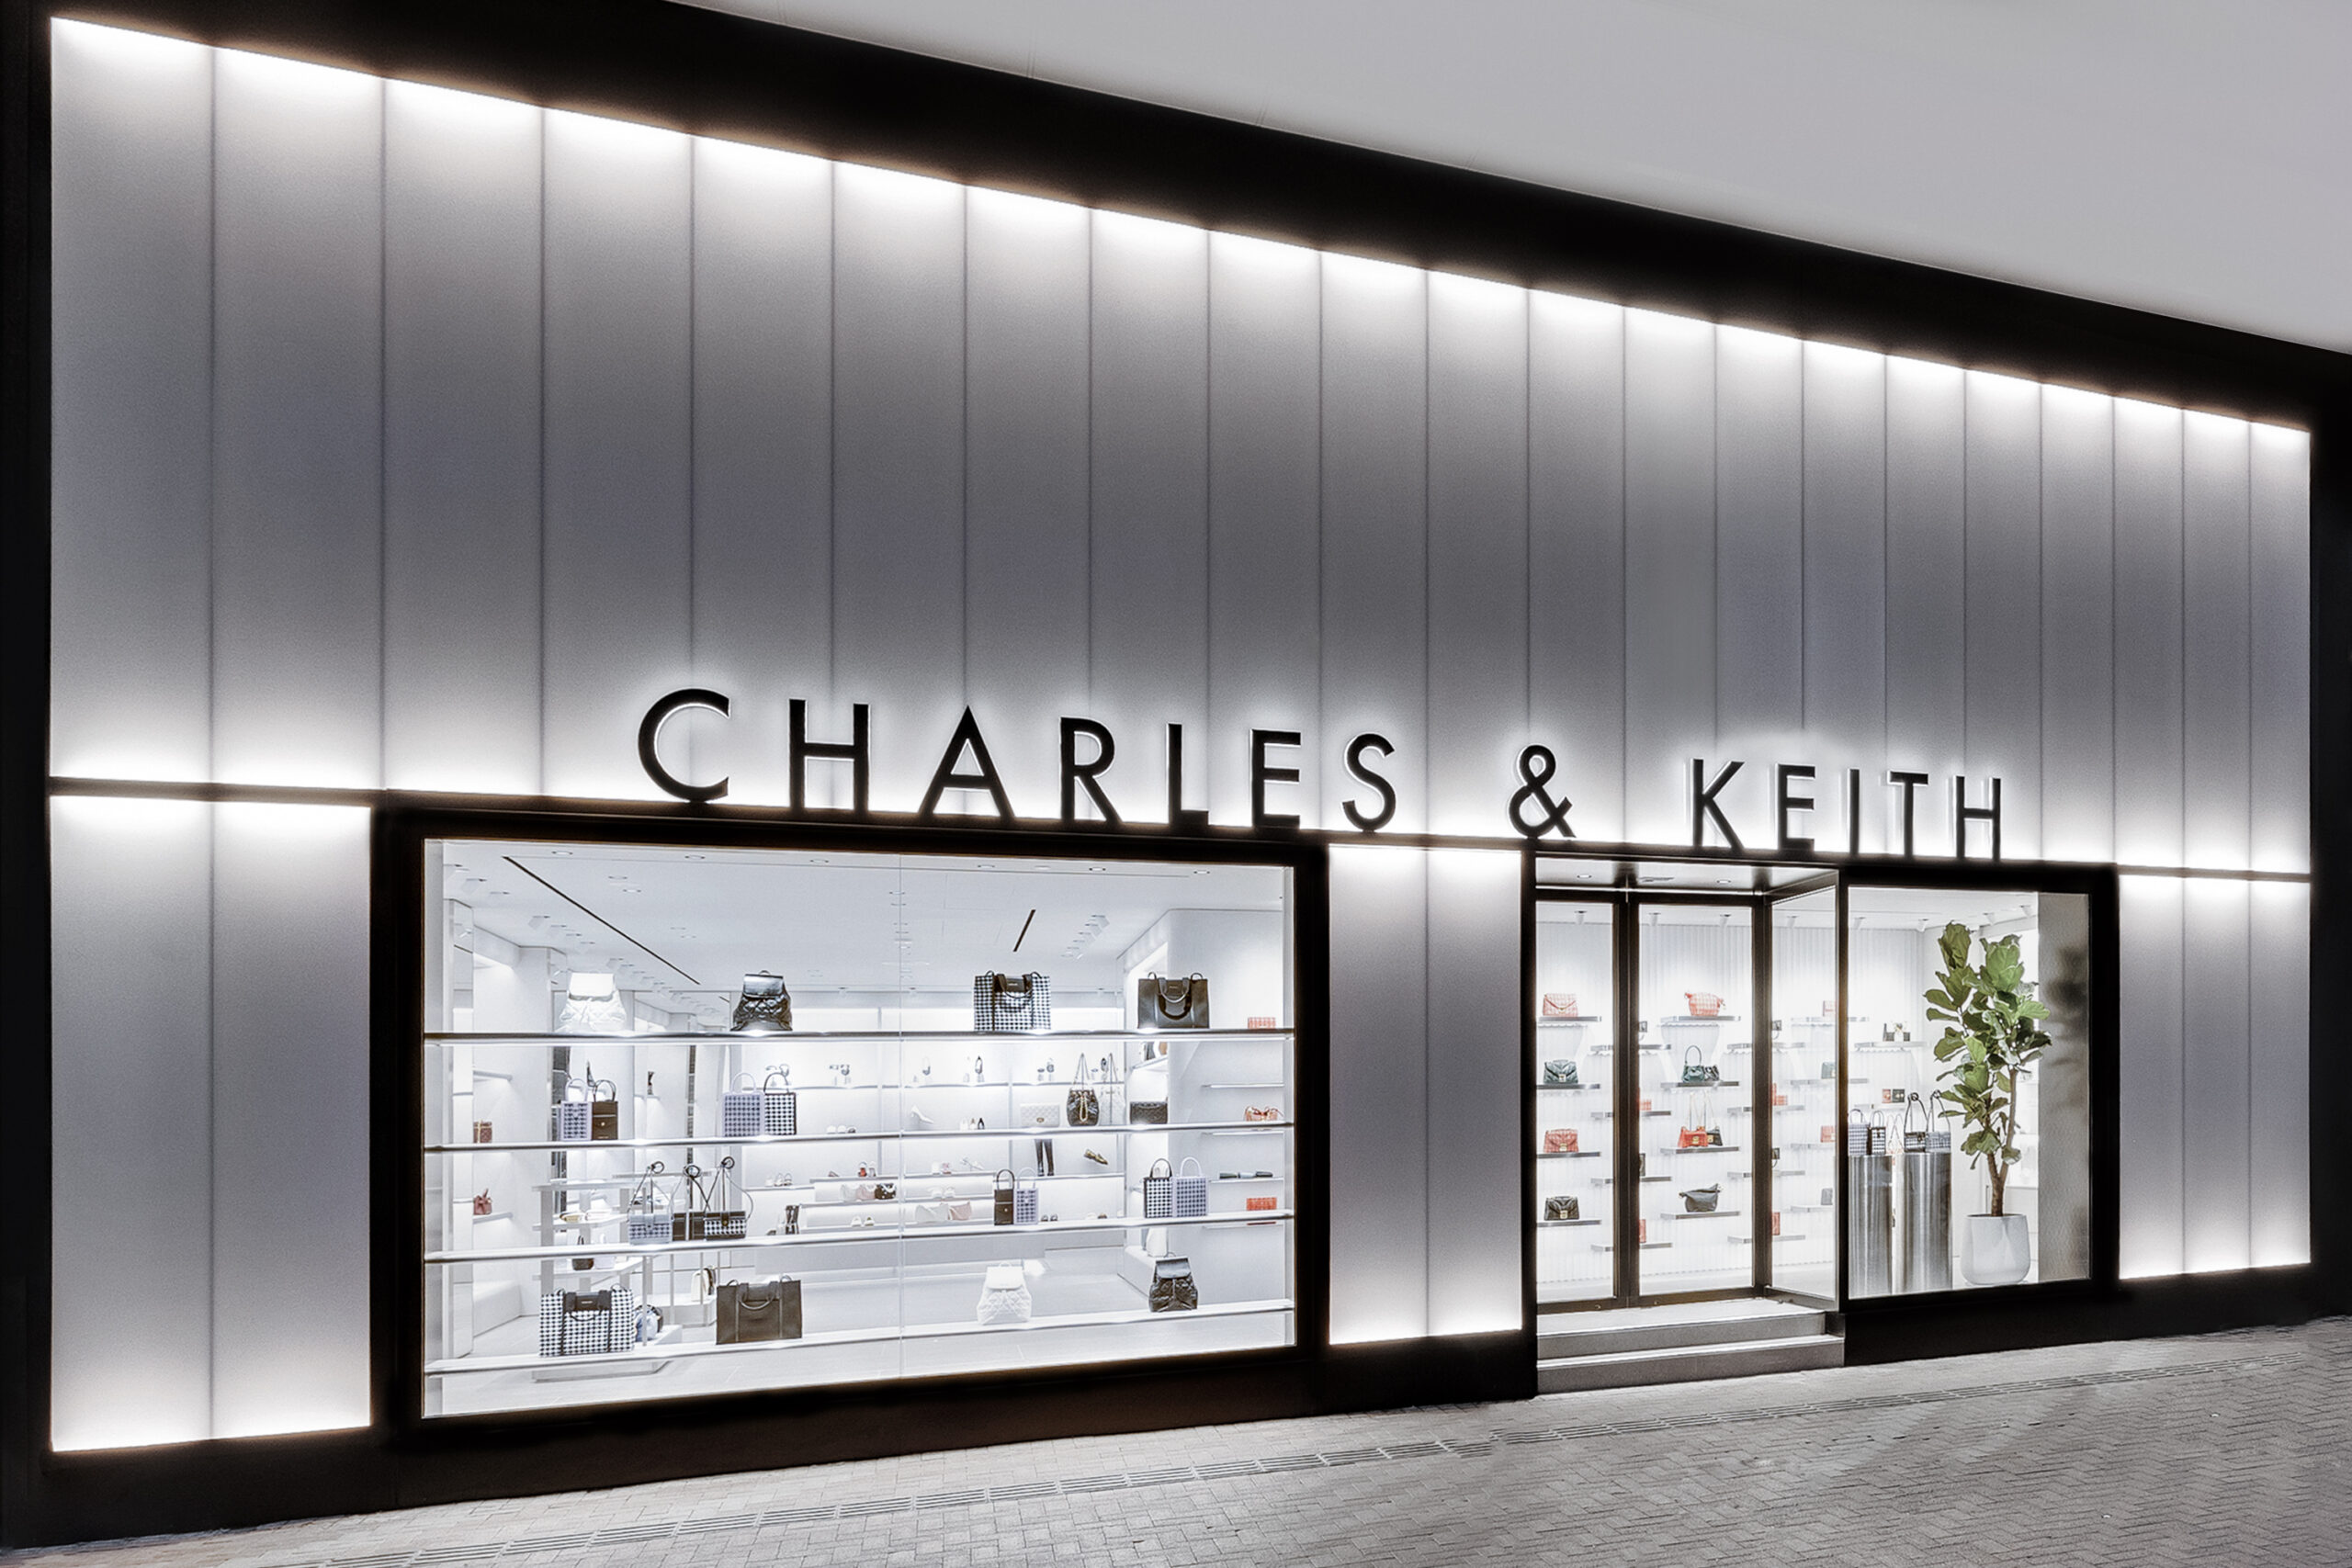 Charles & Keith - Futuristic Store Fixtures